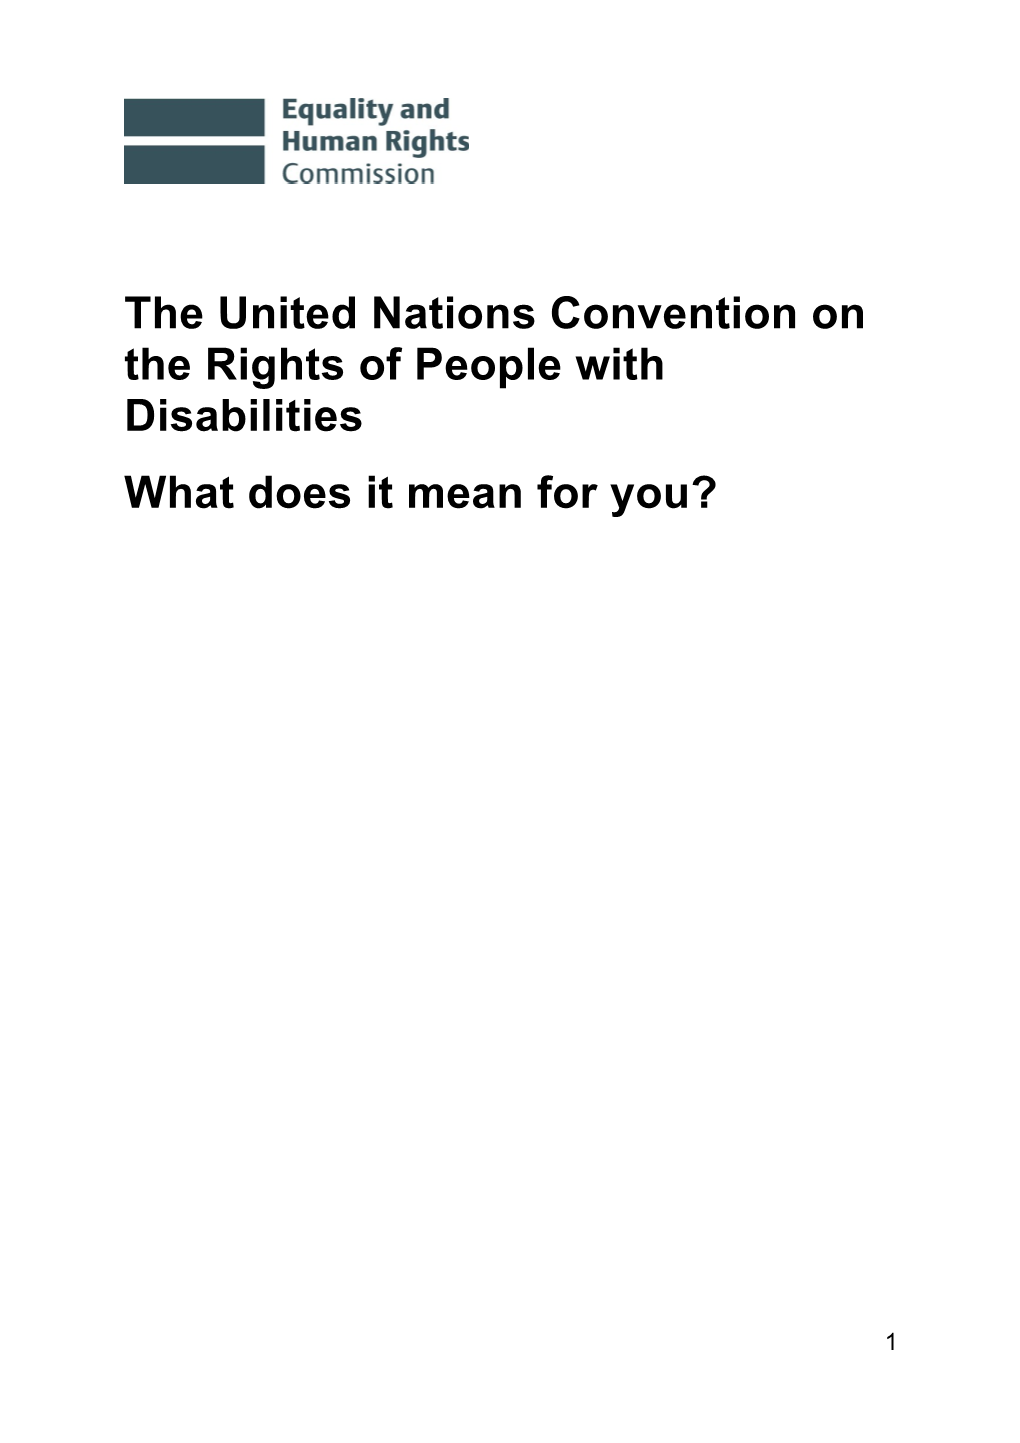 The United Nations Convention on the Rights of People with Disabilities